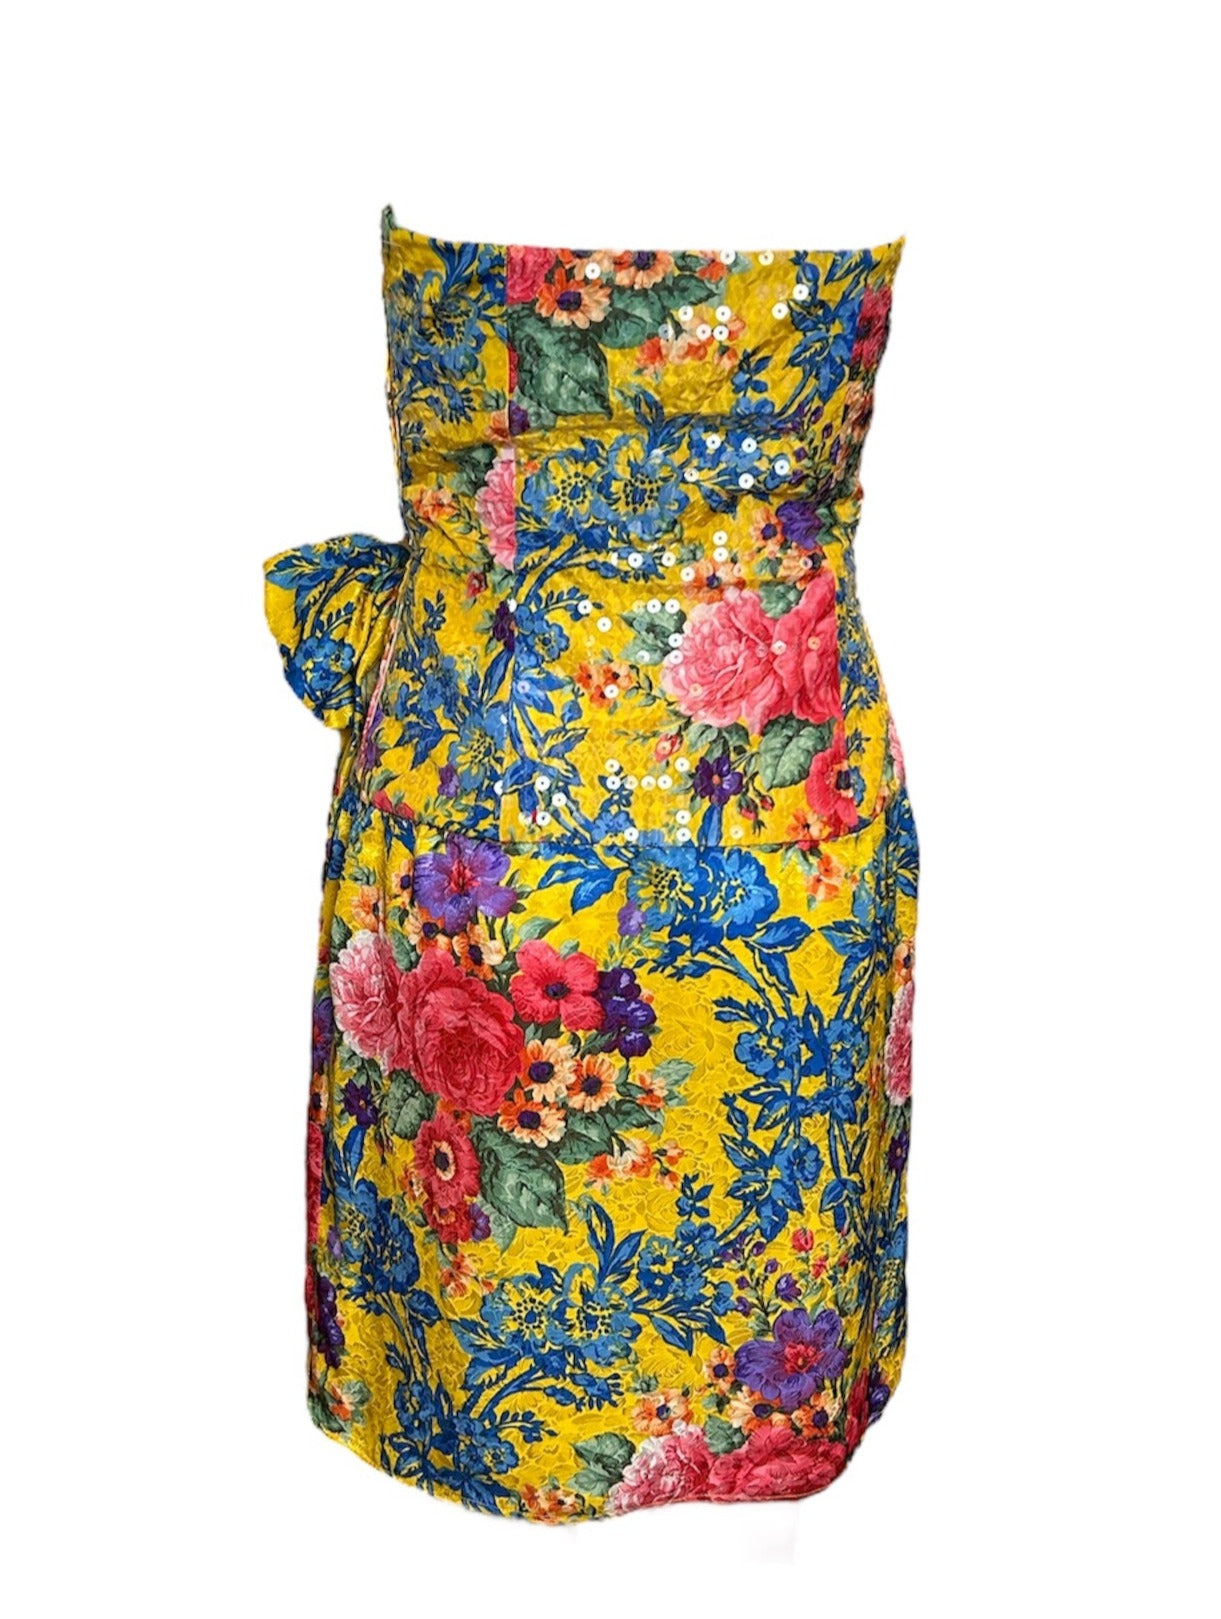  Bellville Sassoon Yellow Floral Silk & Sequined Cocktail Dress BACK PHOTO 4 OF 6